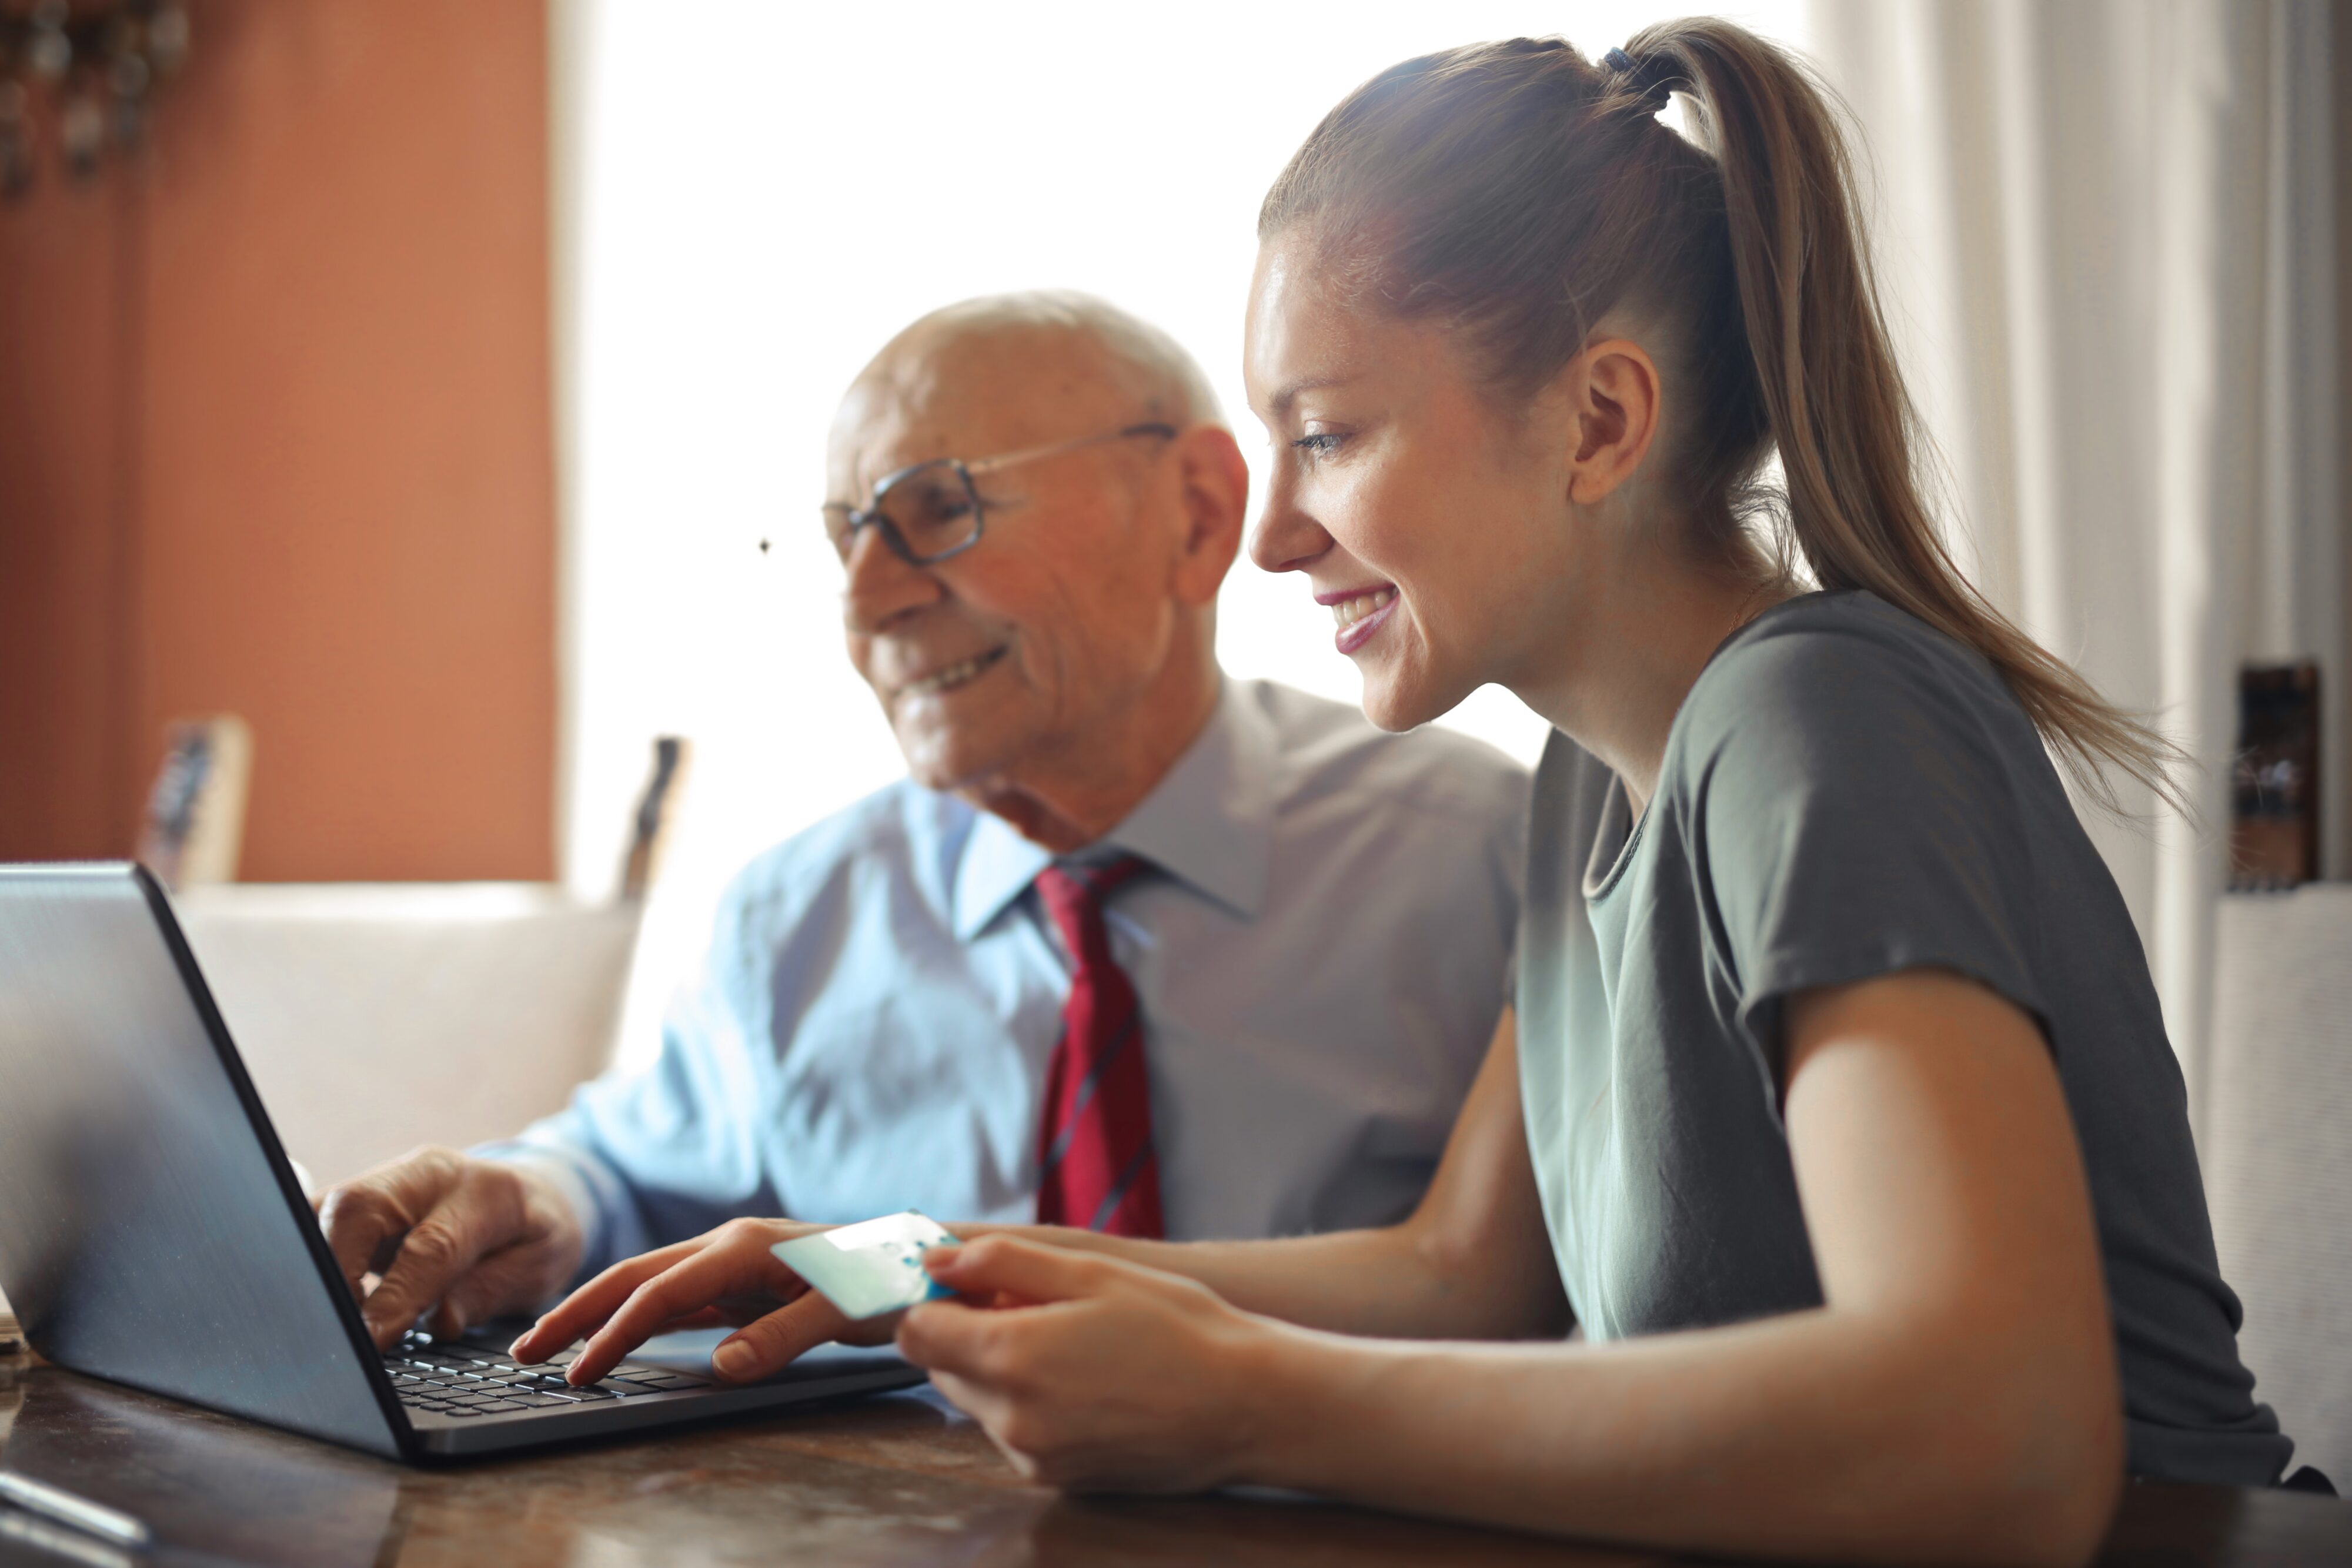 An older man and a young woman sit together facing a laptop, the woman is holding a credit card